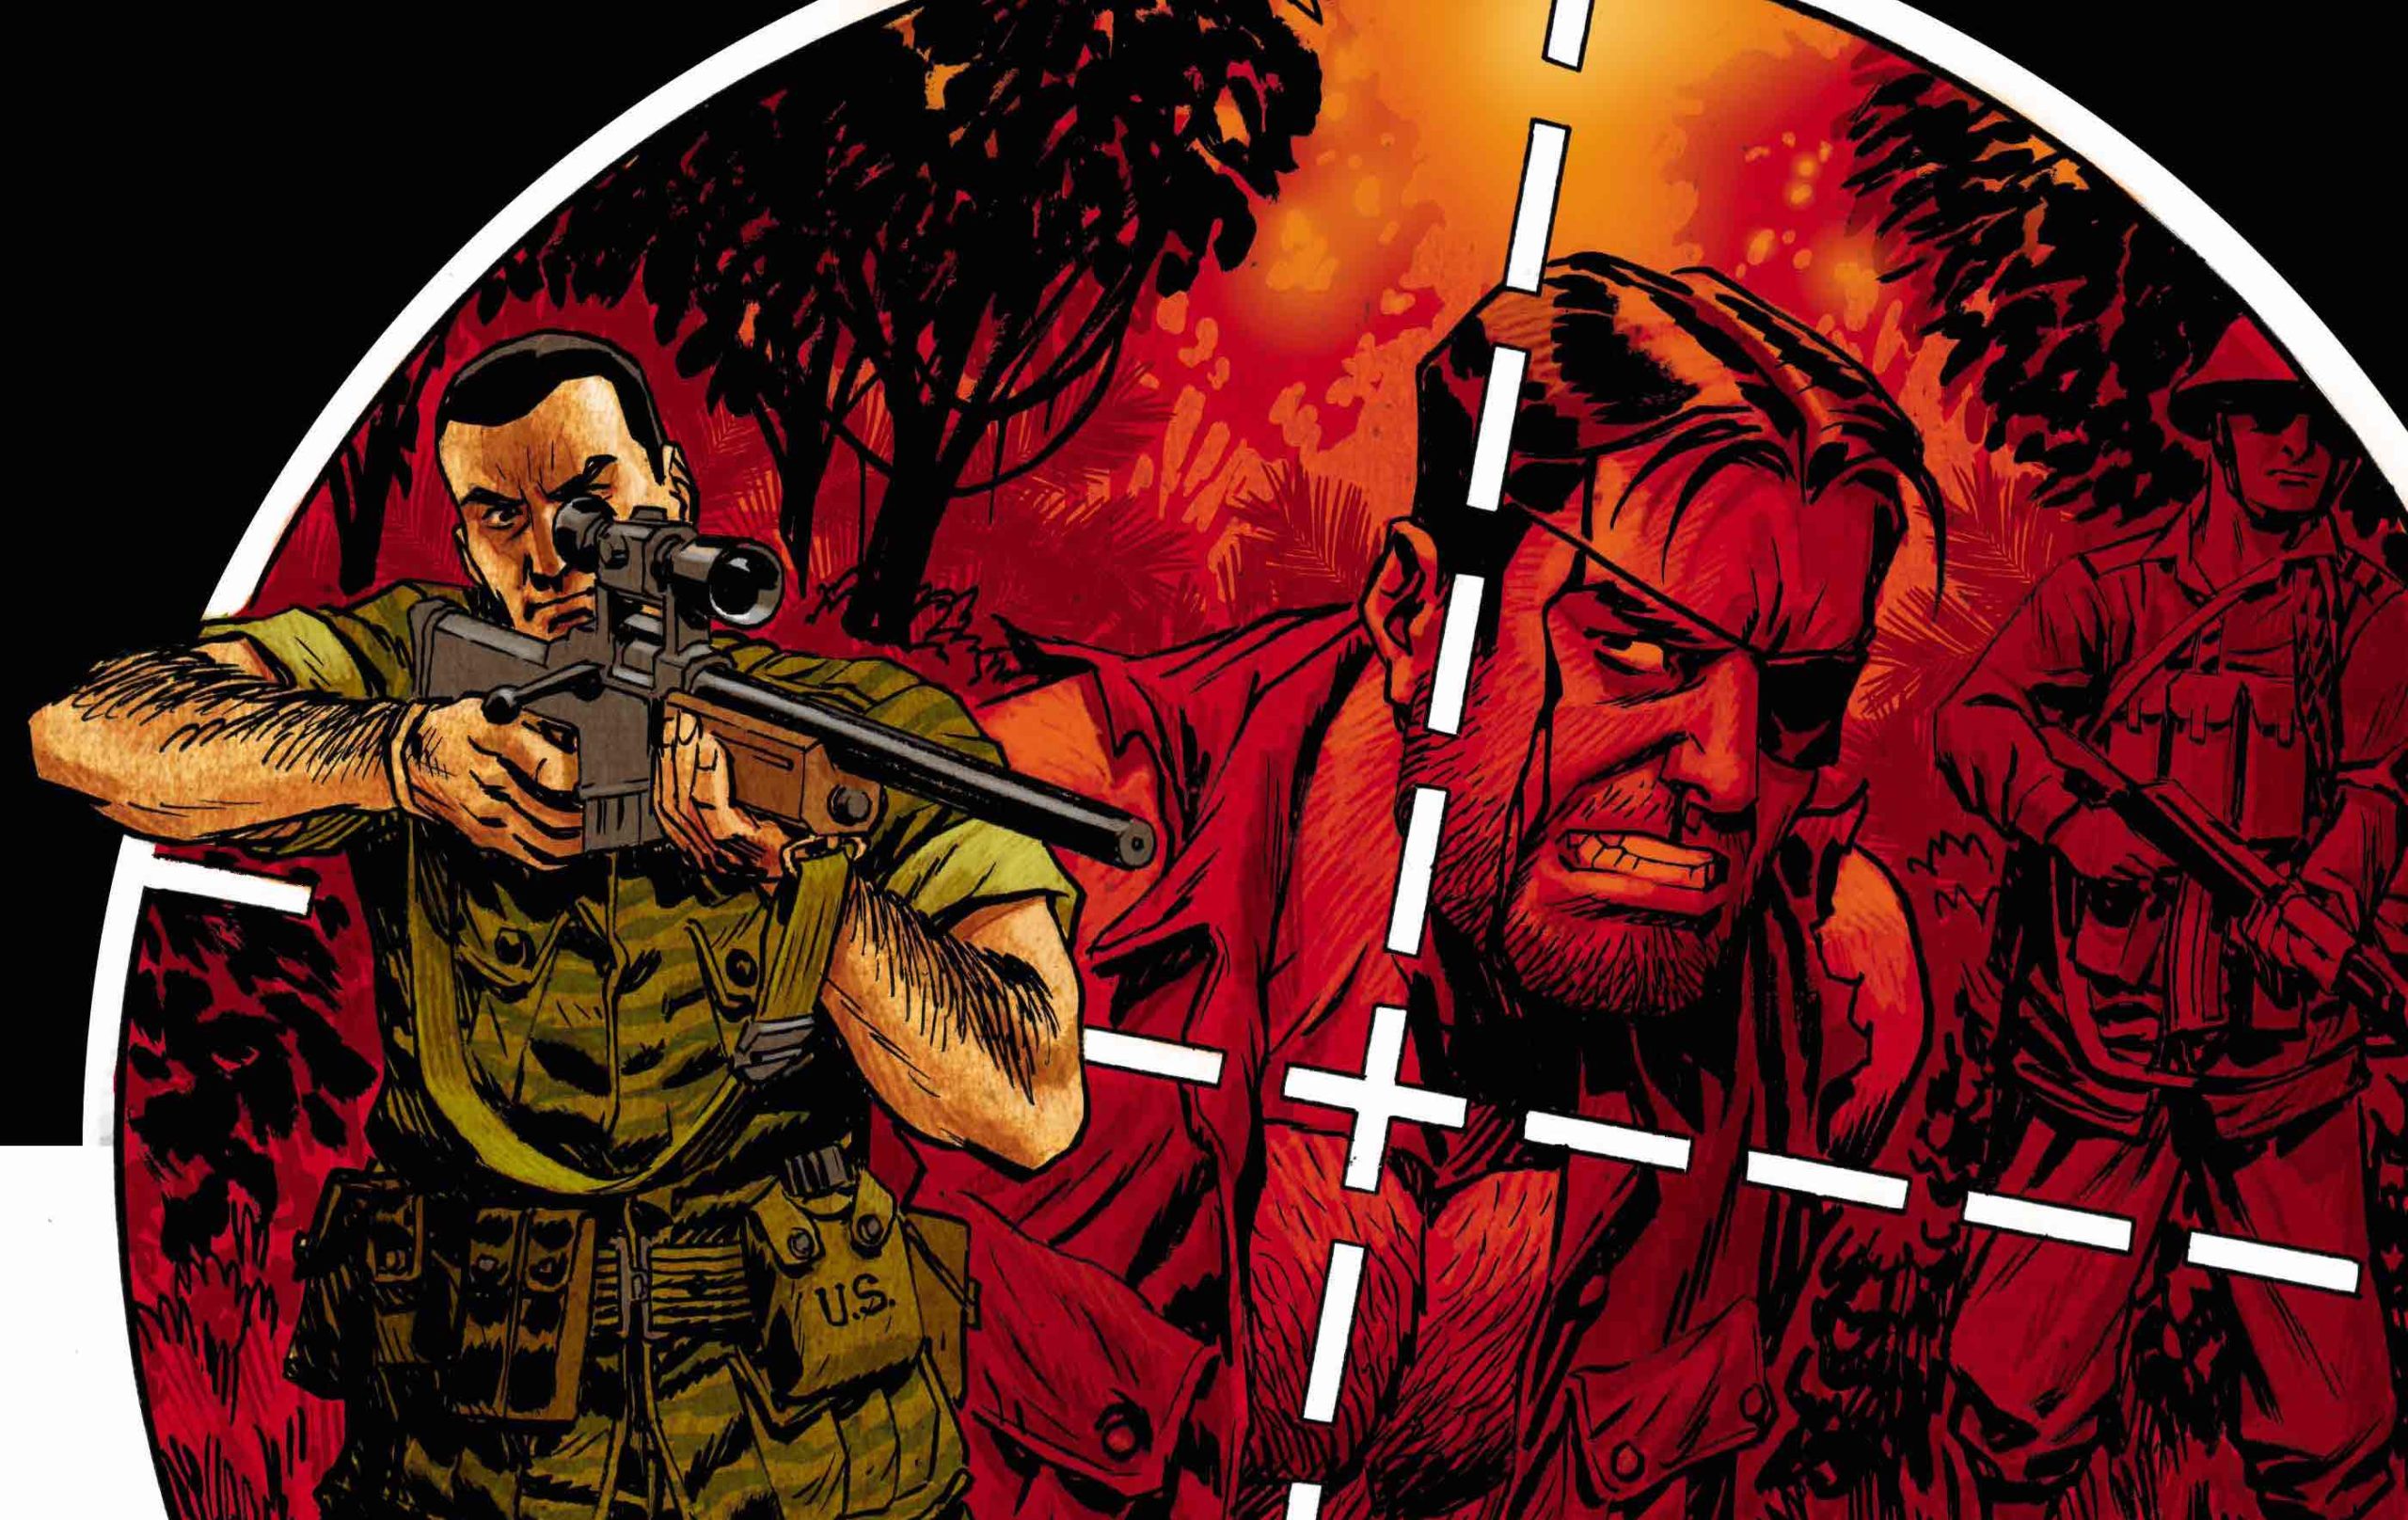 Garth Ennis returns to Marvel with 'Get Fury' starting May 1